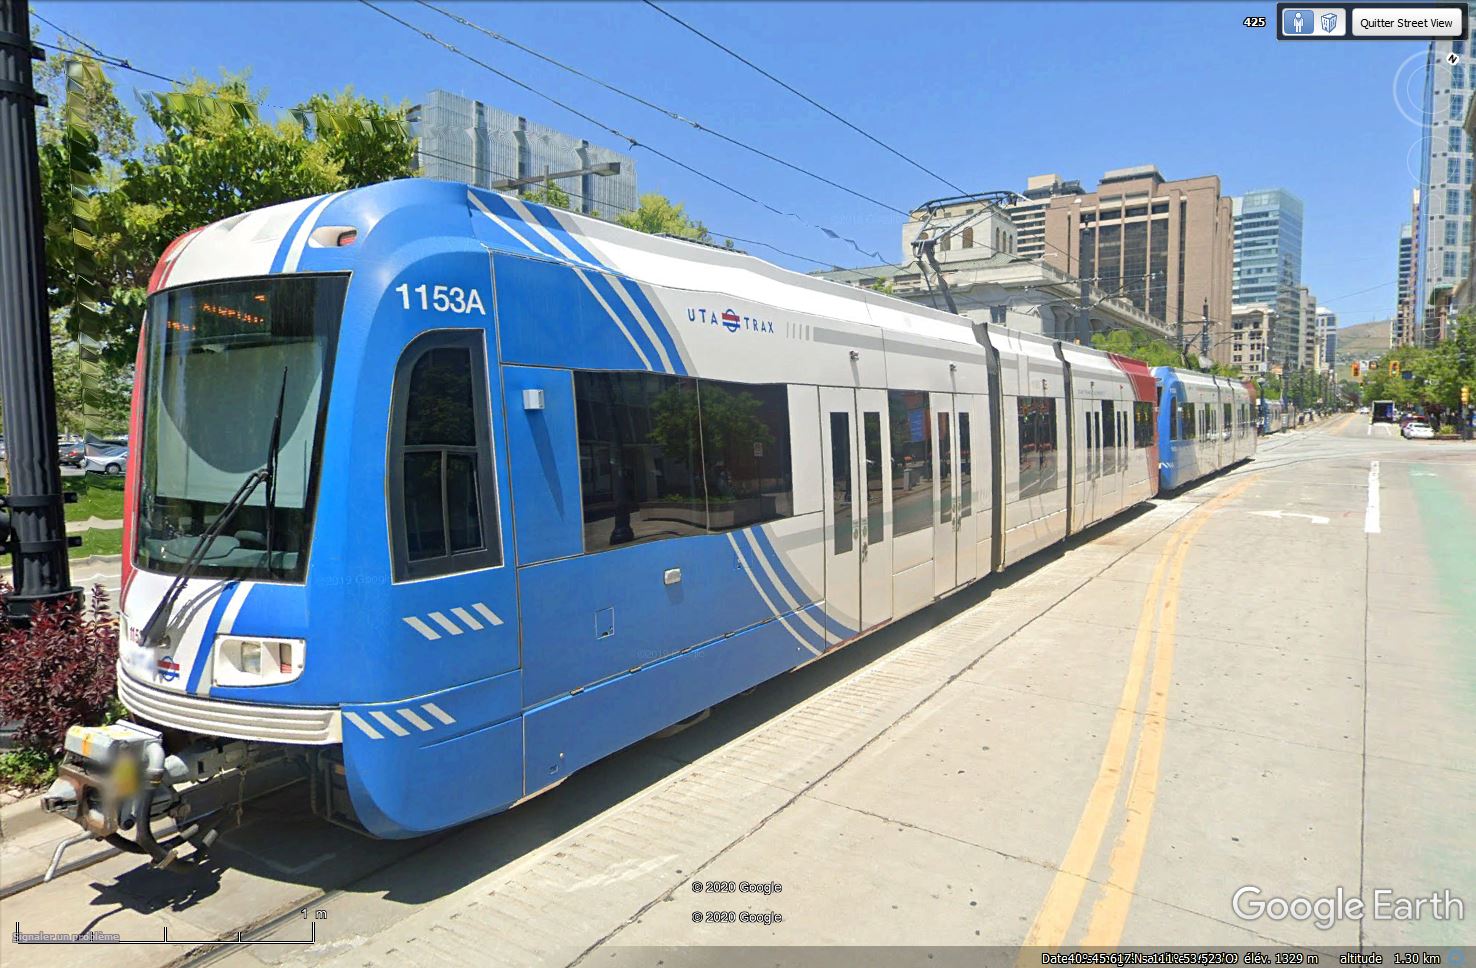 STREET VIEW : les tramways en action - Page 4 Tsge1495